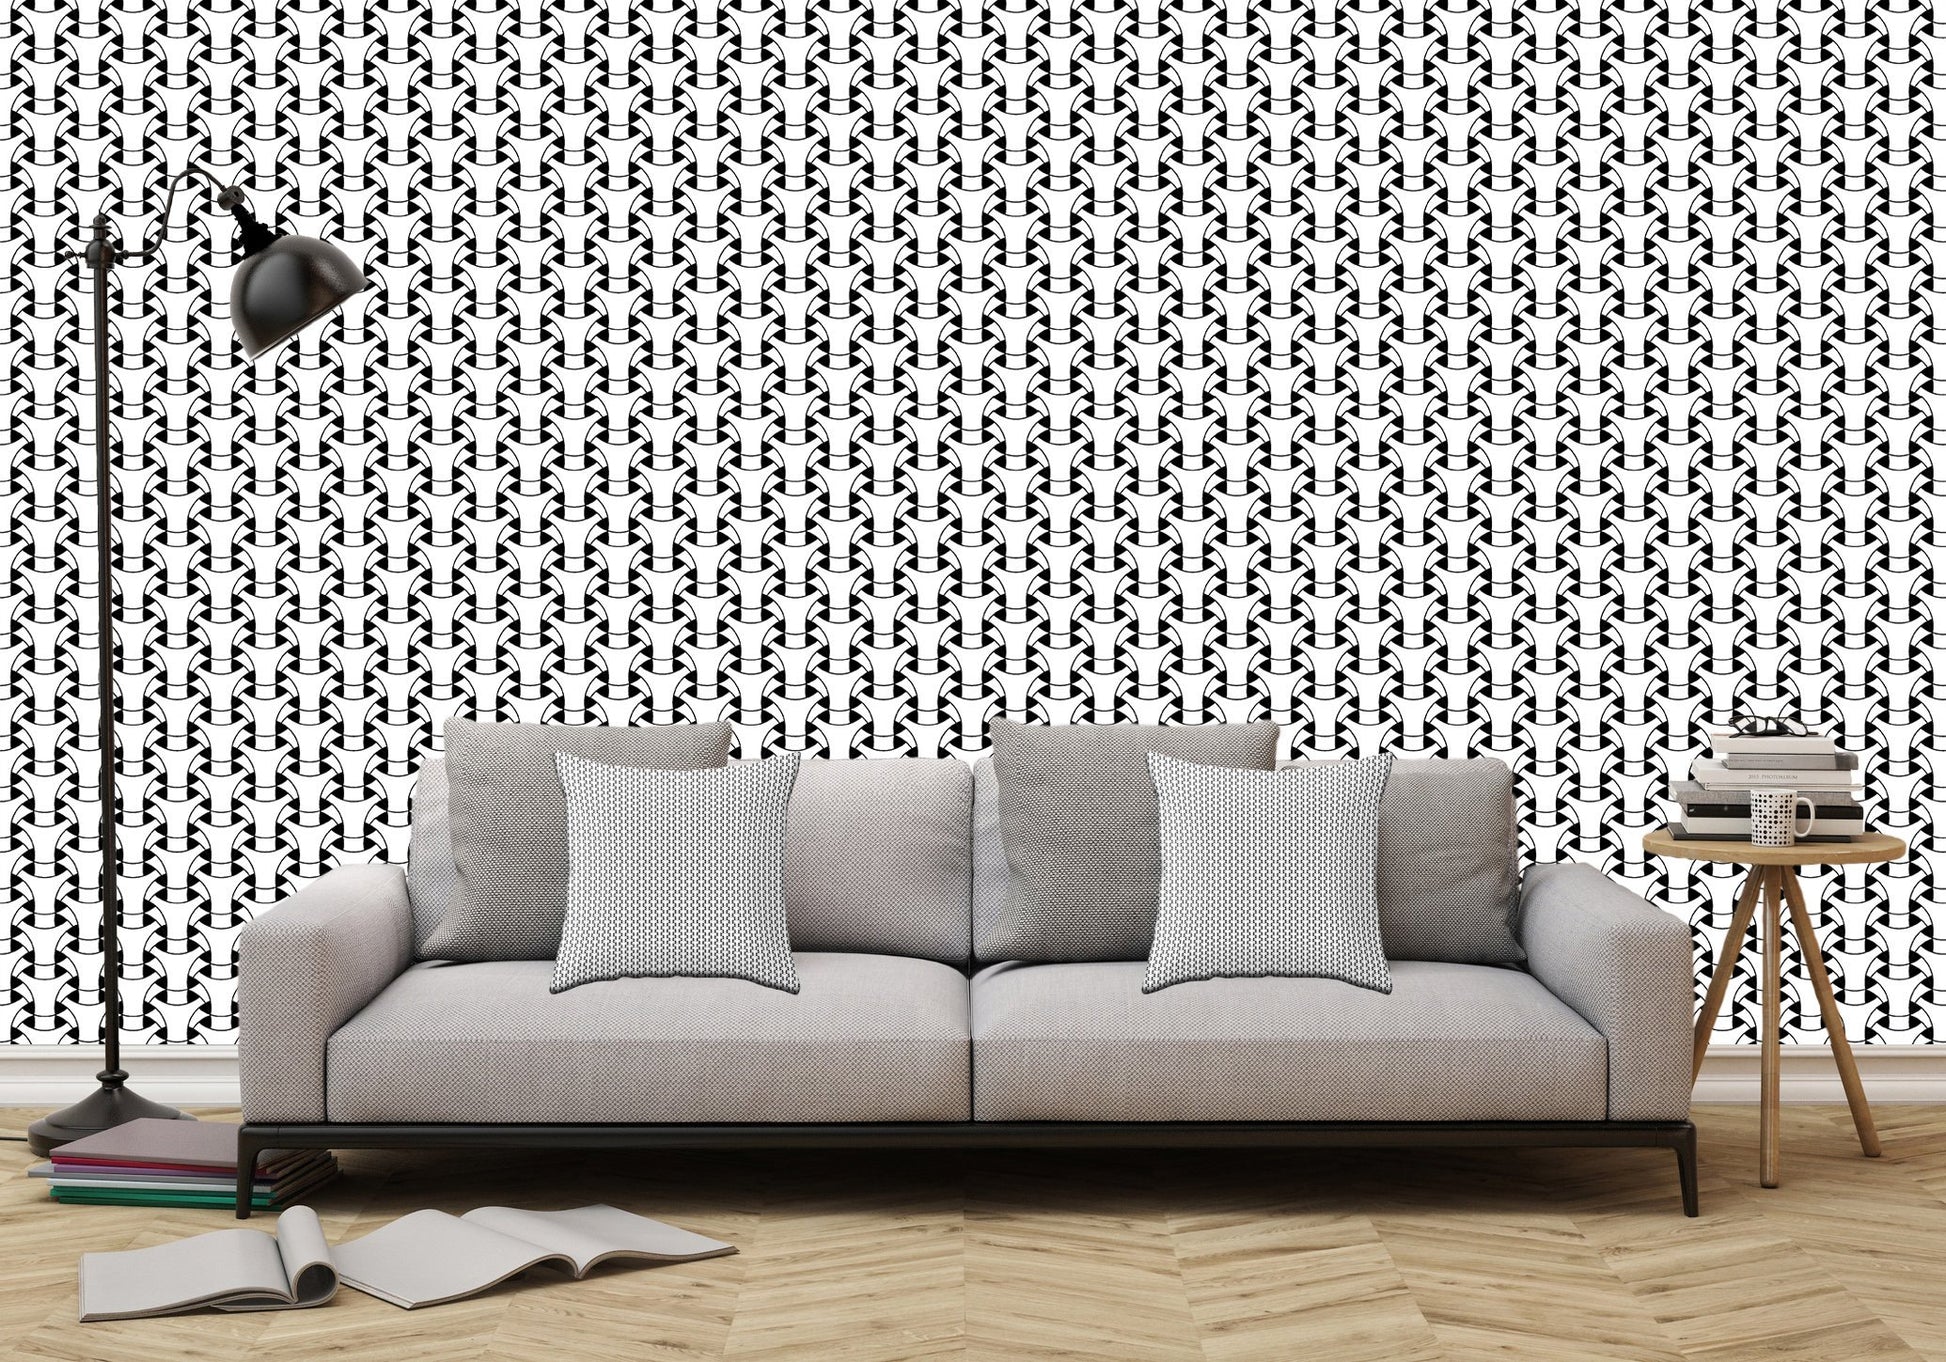 Black and White Basket Weave Circles Shapes 2 - Adhesive Wallpaper - Removable Wallpaper - Wall Sticker - Full Size Wall Mural  - PIPAFINEART